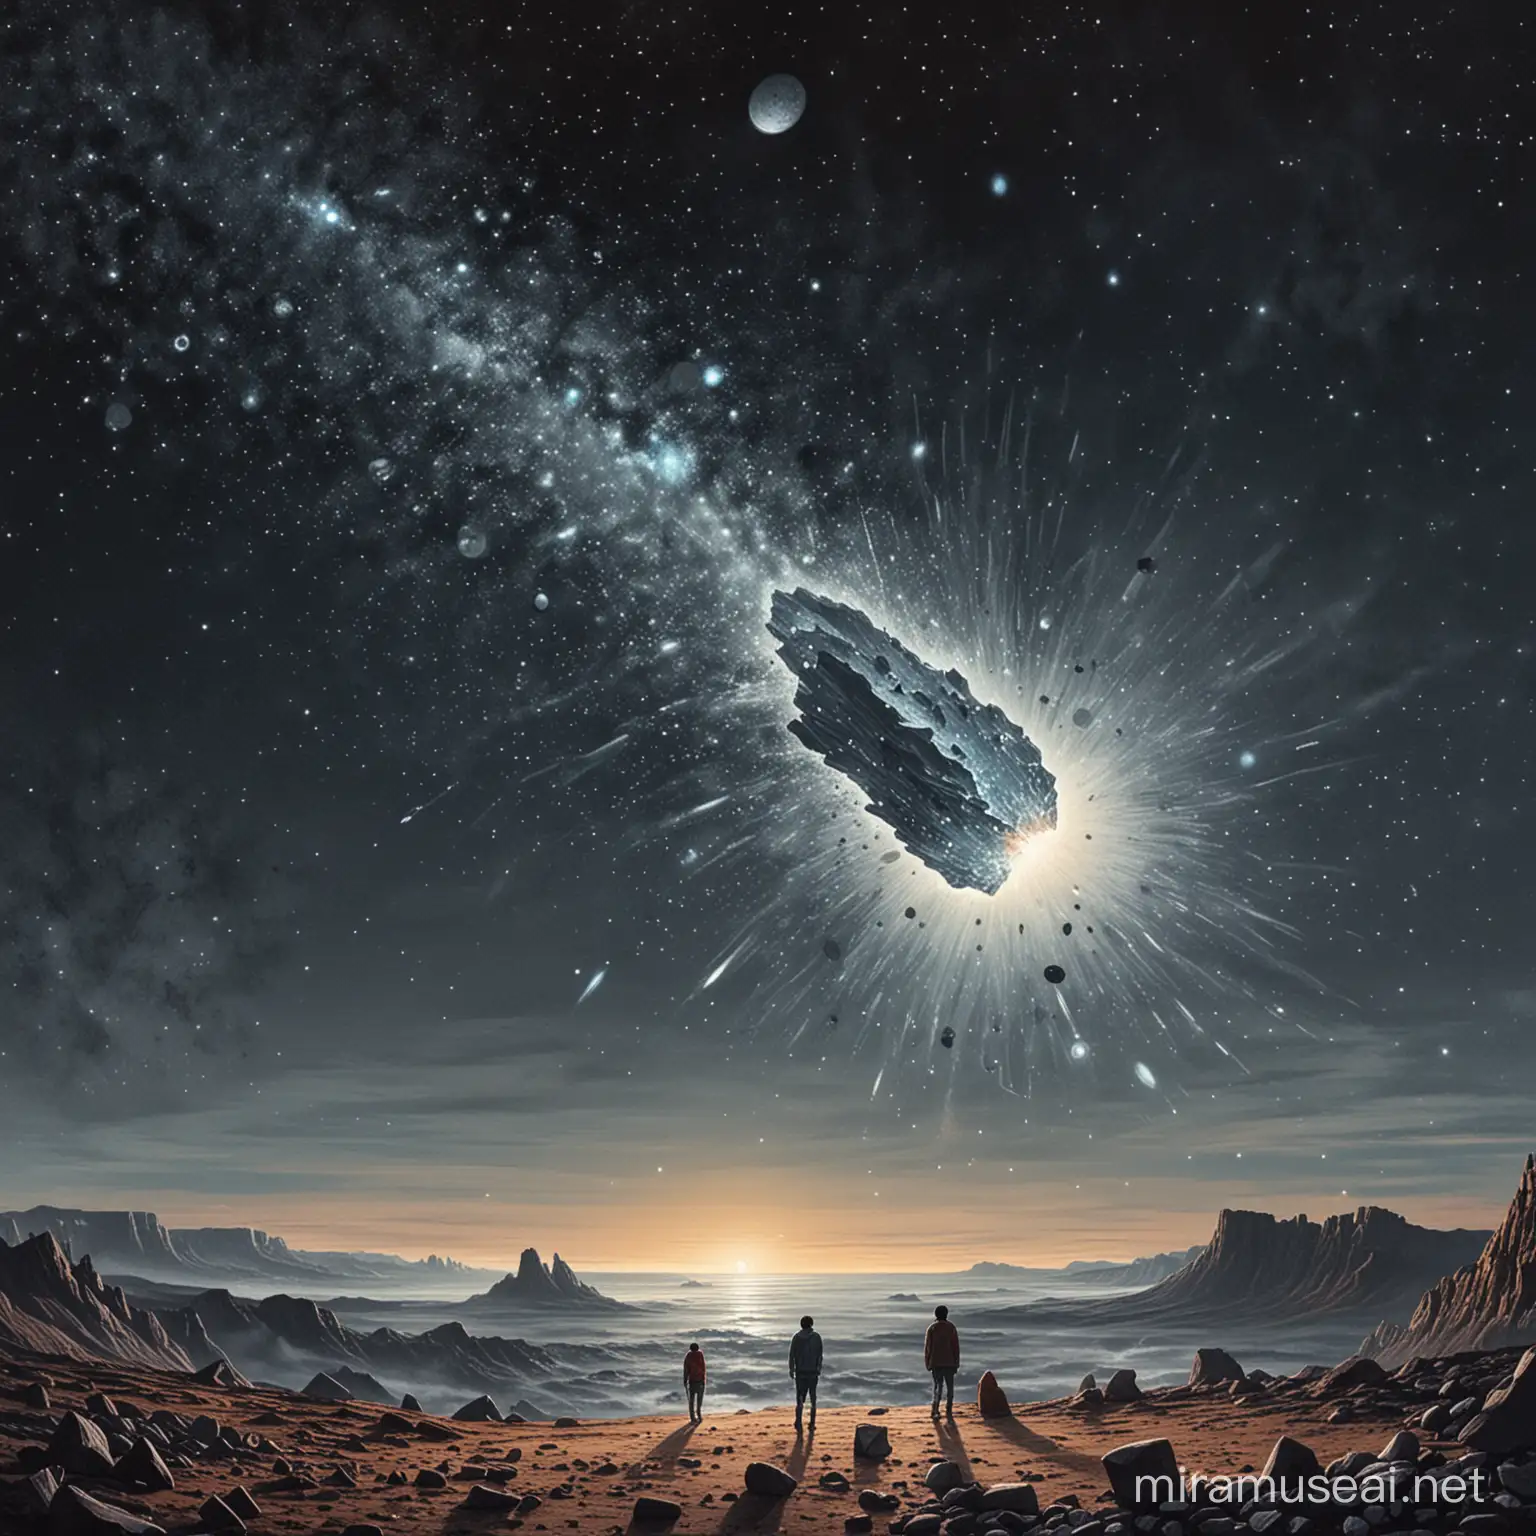 draw a comet which smashed the moon  into pieces and some people is watching in disbelieve
